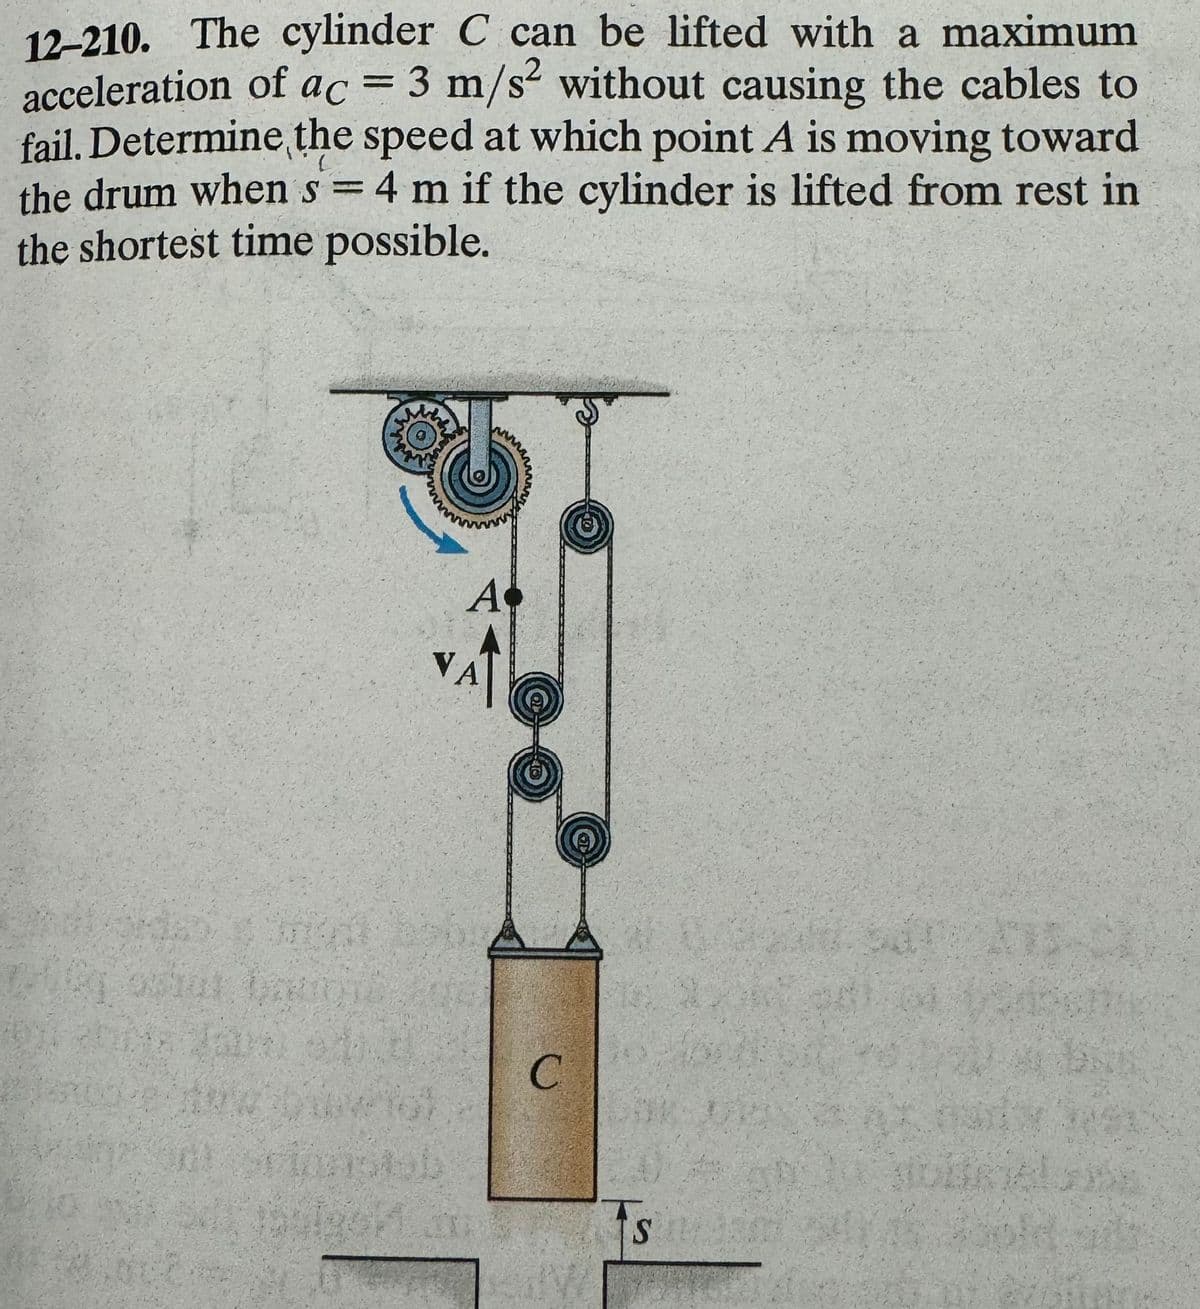 12-210. The cylinder C can be lifted with a maximum
acceleration of ac = 3 m/s² without causing the cables to
fail. Determine the speed at which point A is moving toward
the drum when s = 4 m if the cylinder is lifted from rest in
the shortest time possible.
L
A
f outer ba
VA
not boos
FlashAob
Julgen an
C
Is mis